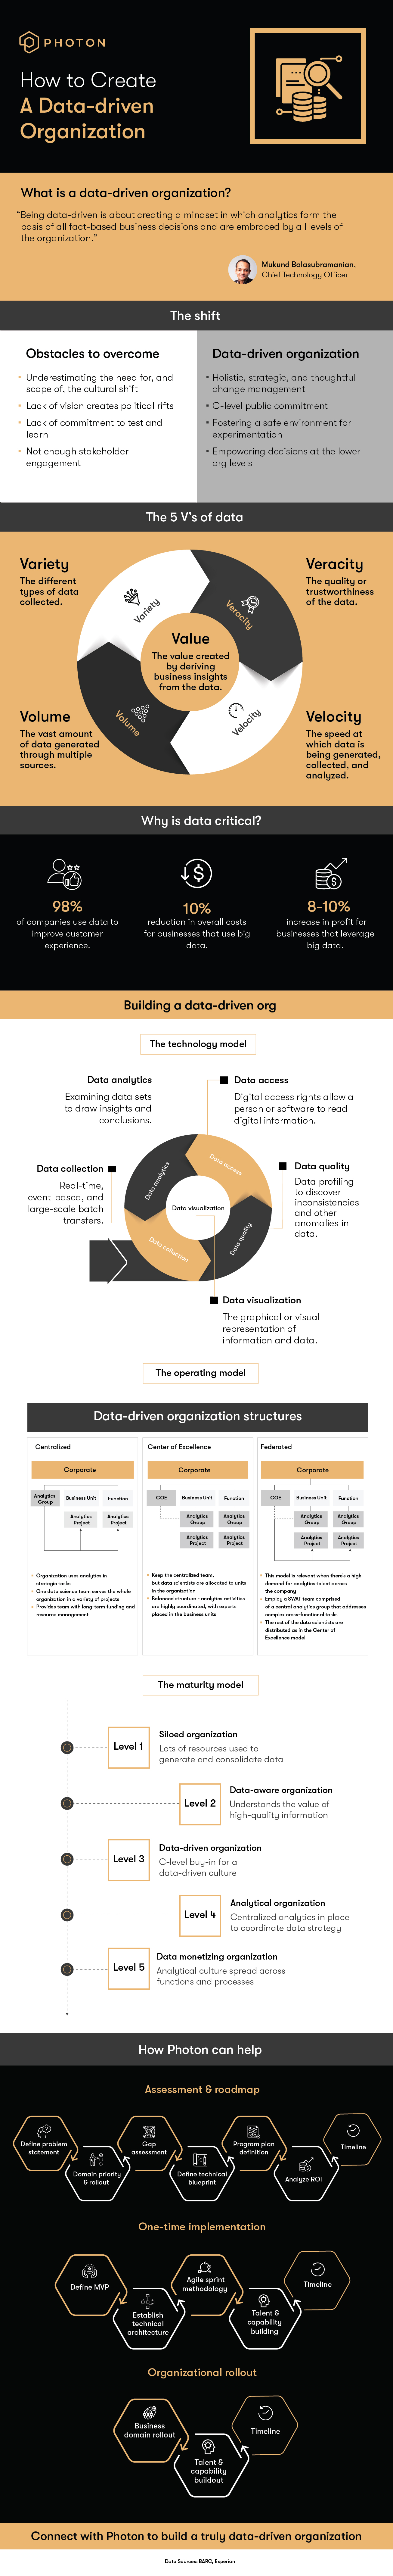 How to build a data driven organization